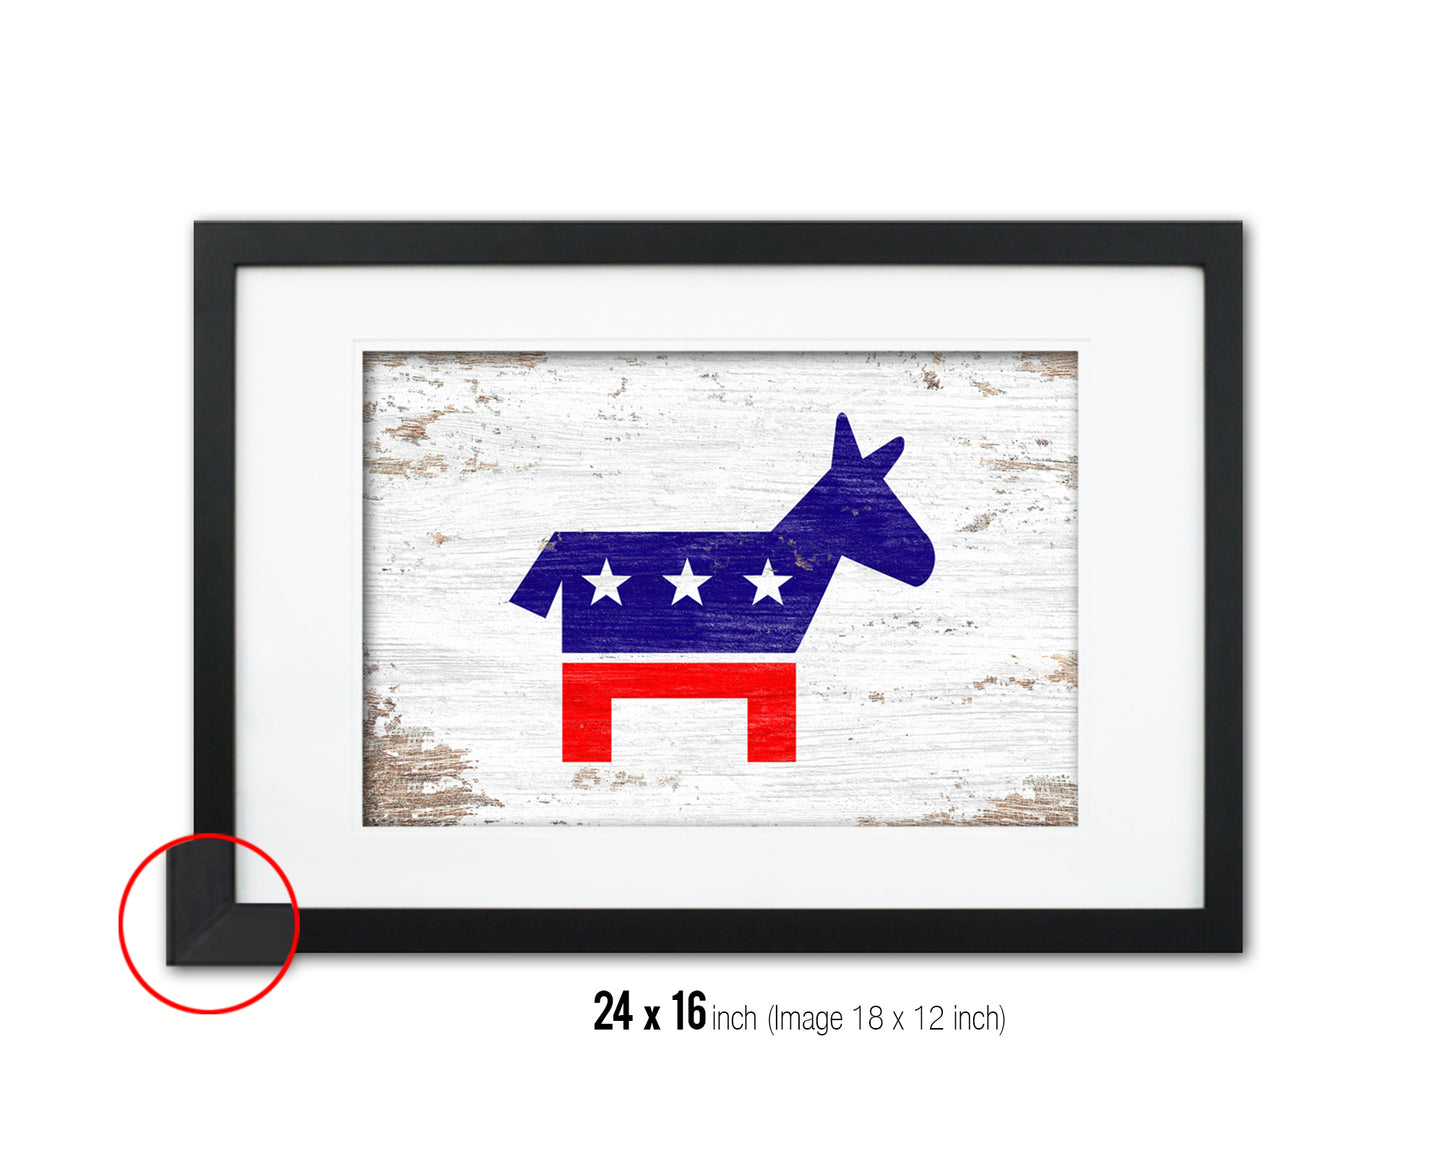 Democratic Party Political Democrat Shabby Chic Military Flag Framed Print Decor Wall Art Gifts